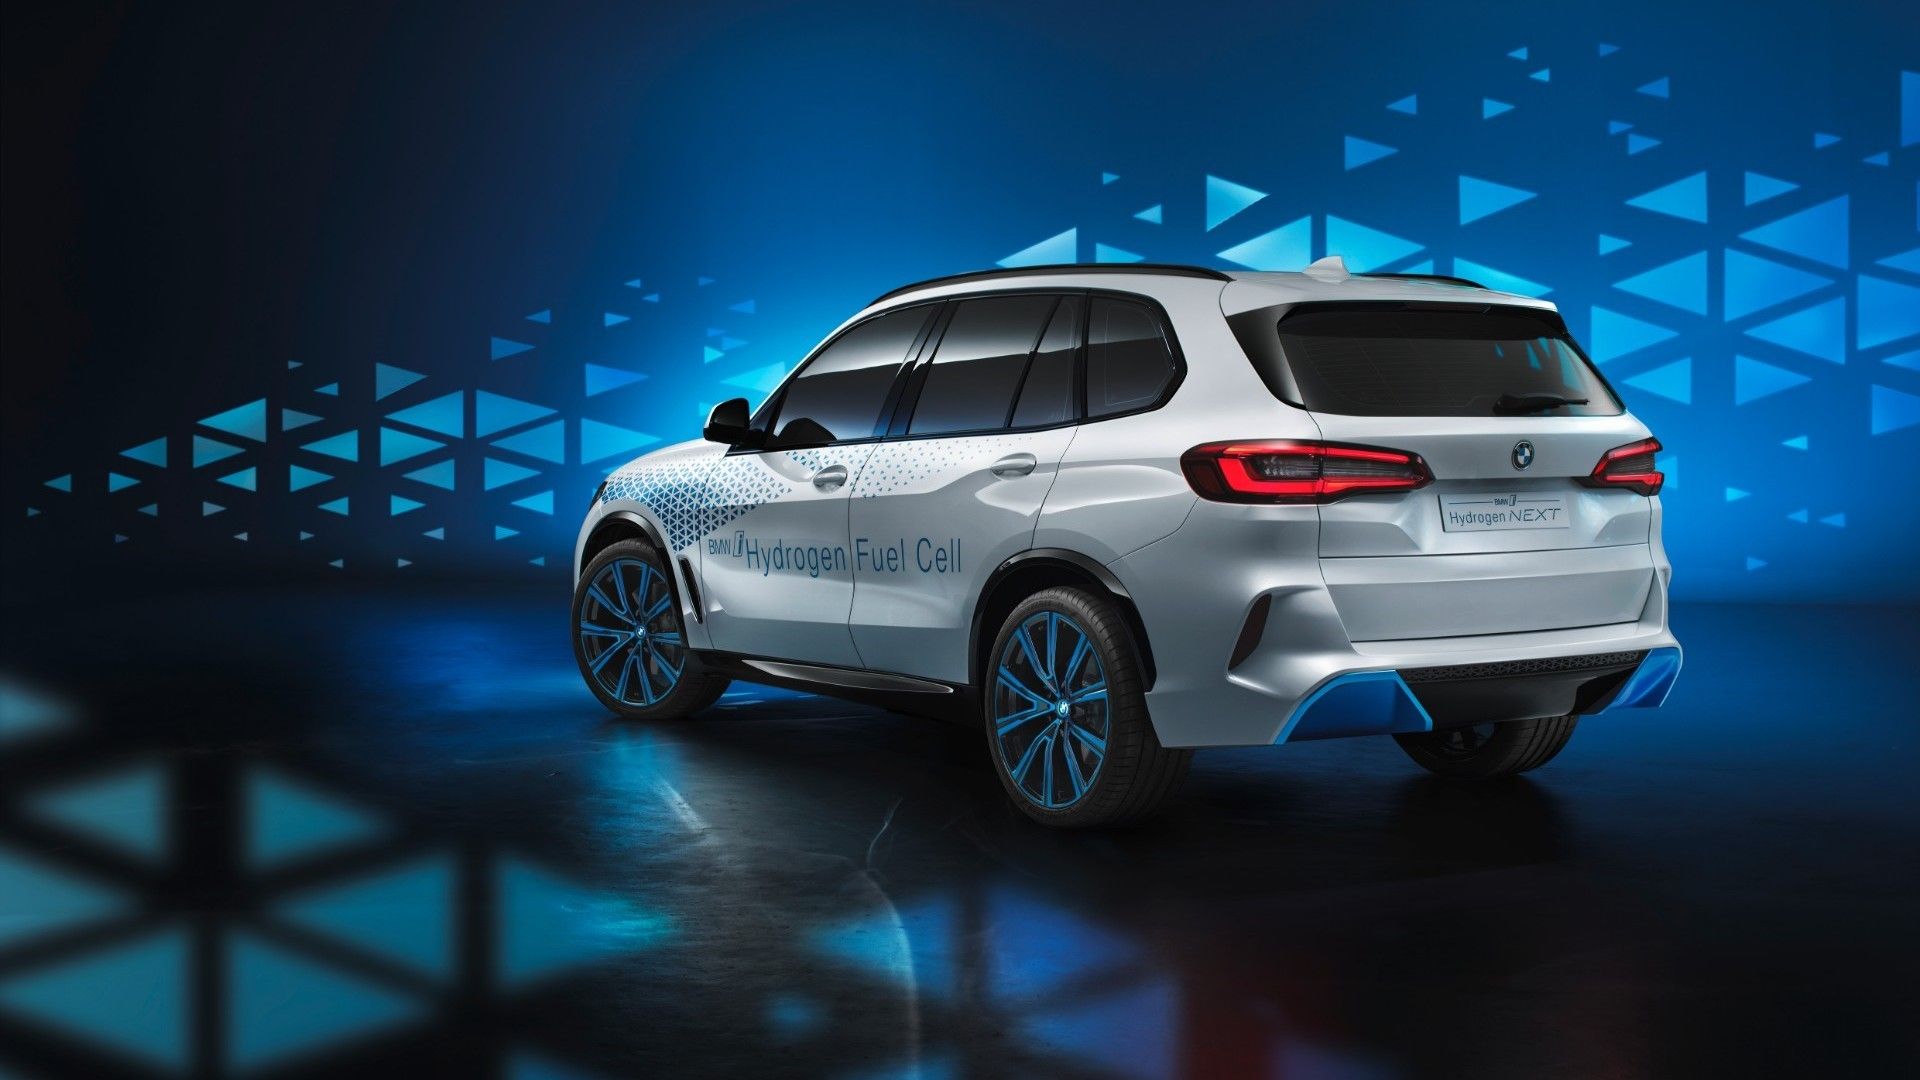 2022 BMW X5 Hydrogen Fuel Cell Vehicle: Expected Launch Date, Performance, And Range